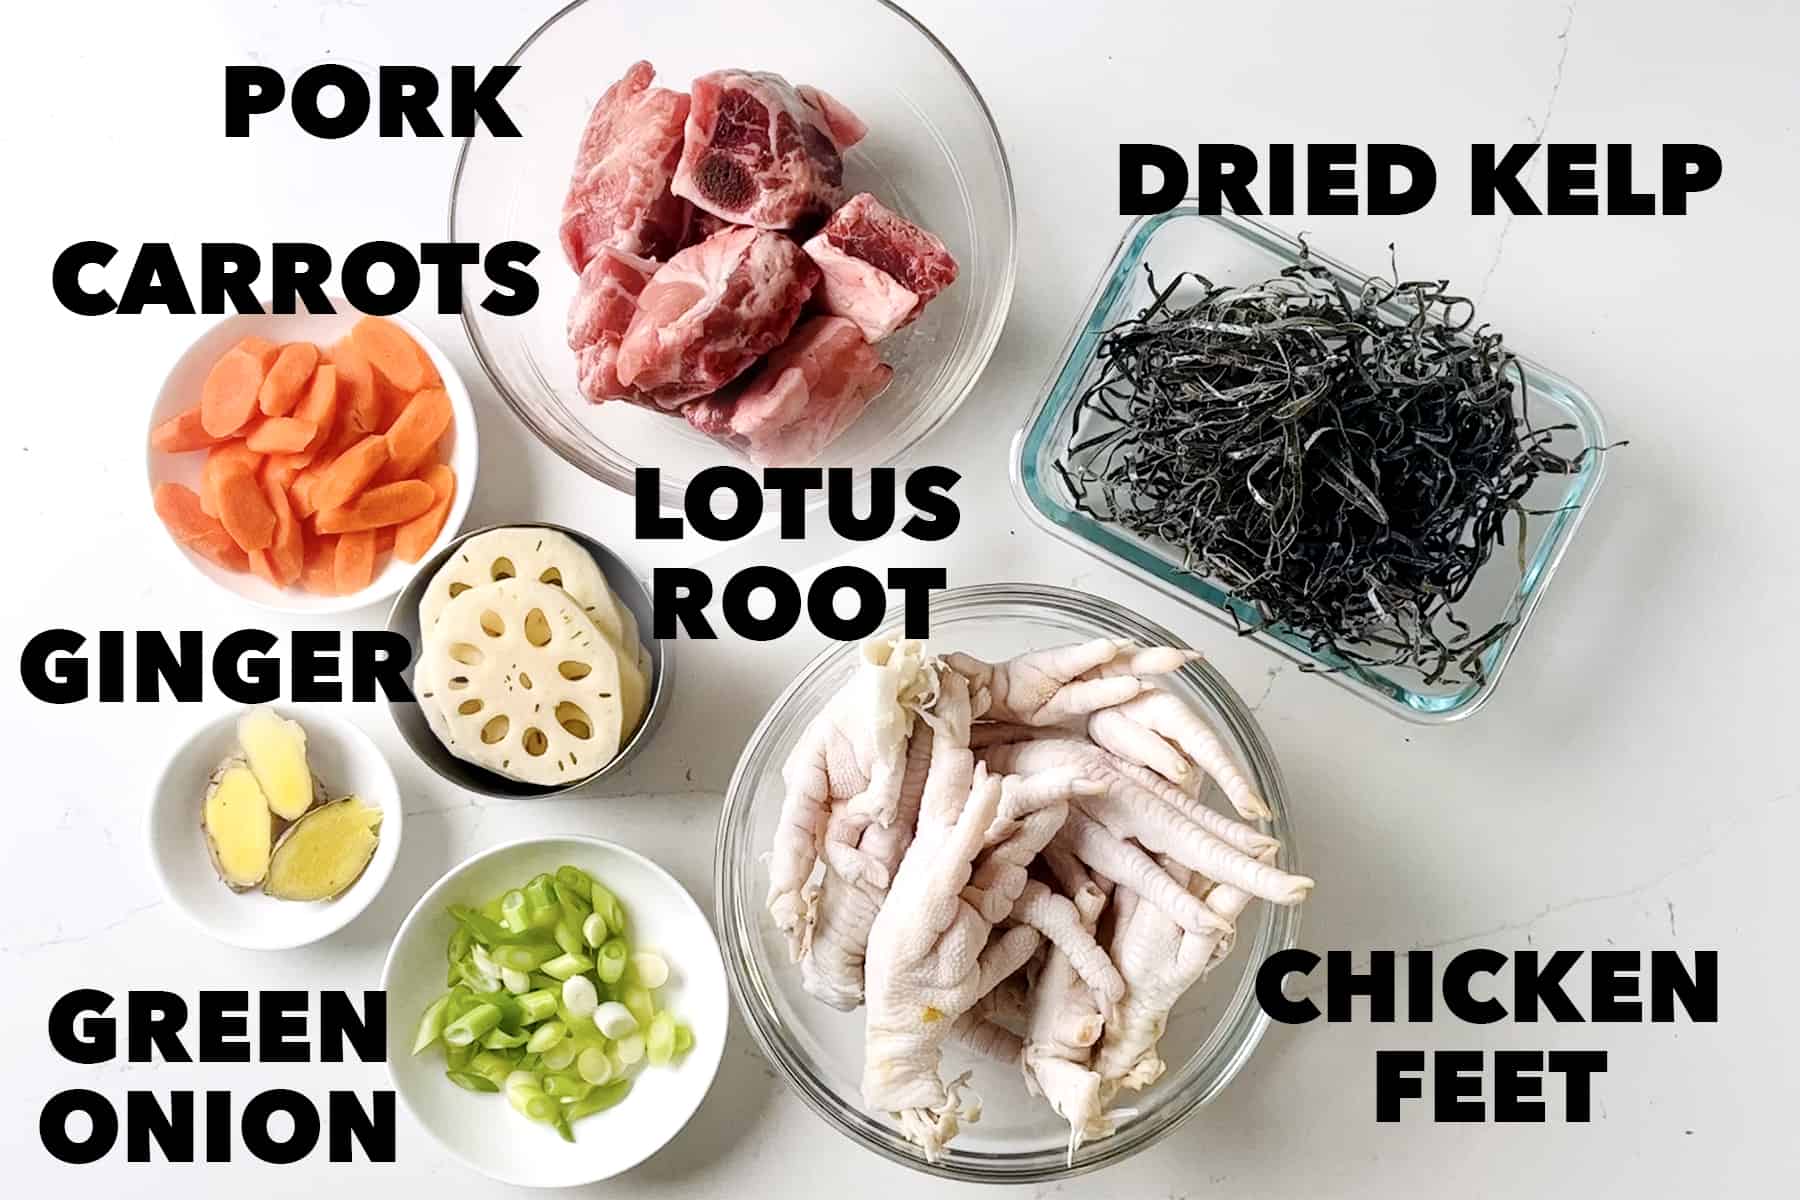 ingredients for Chicken Feet Soup in glass bowls